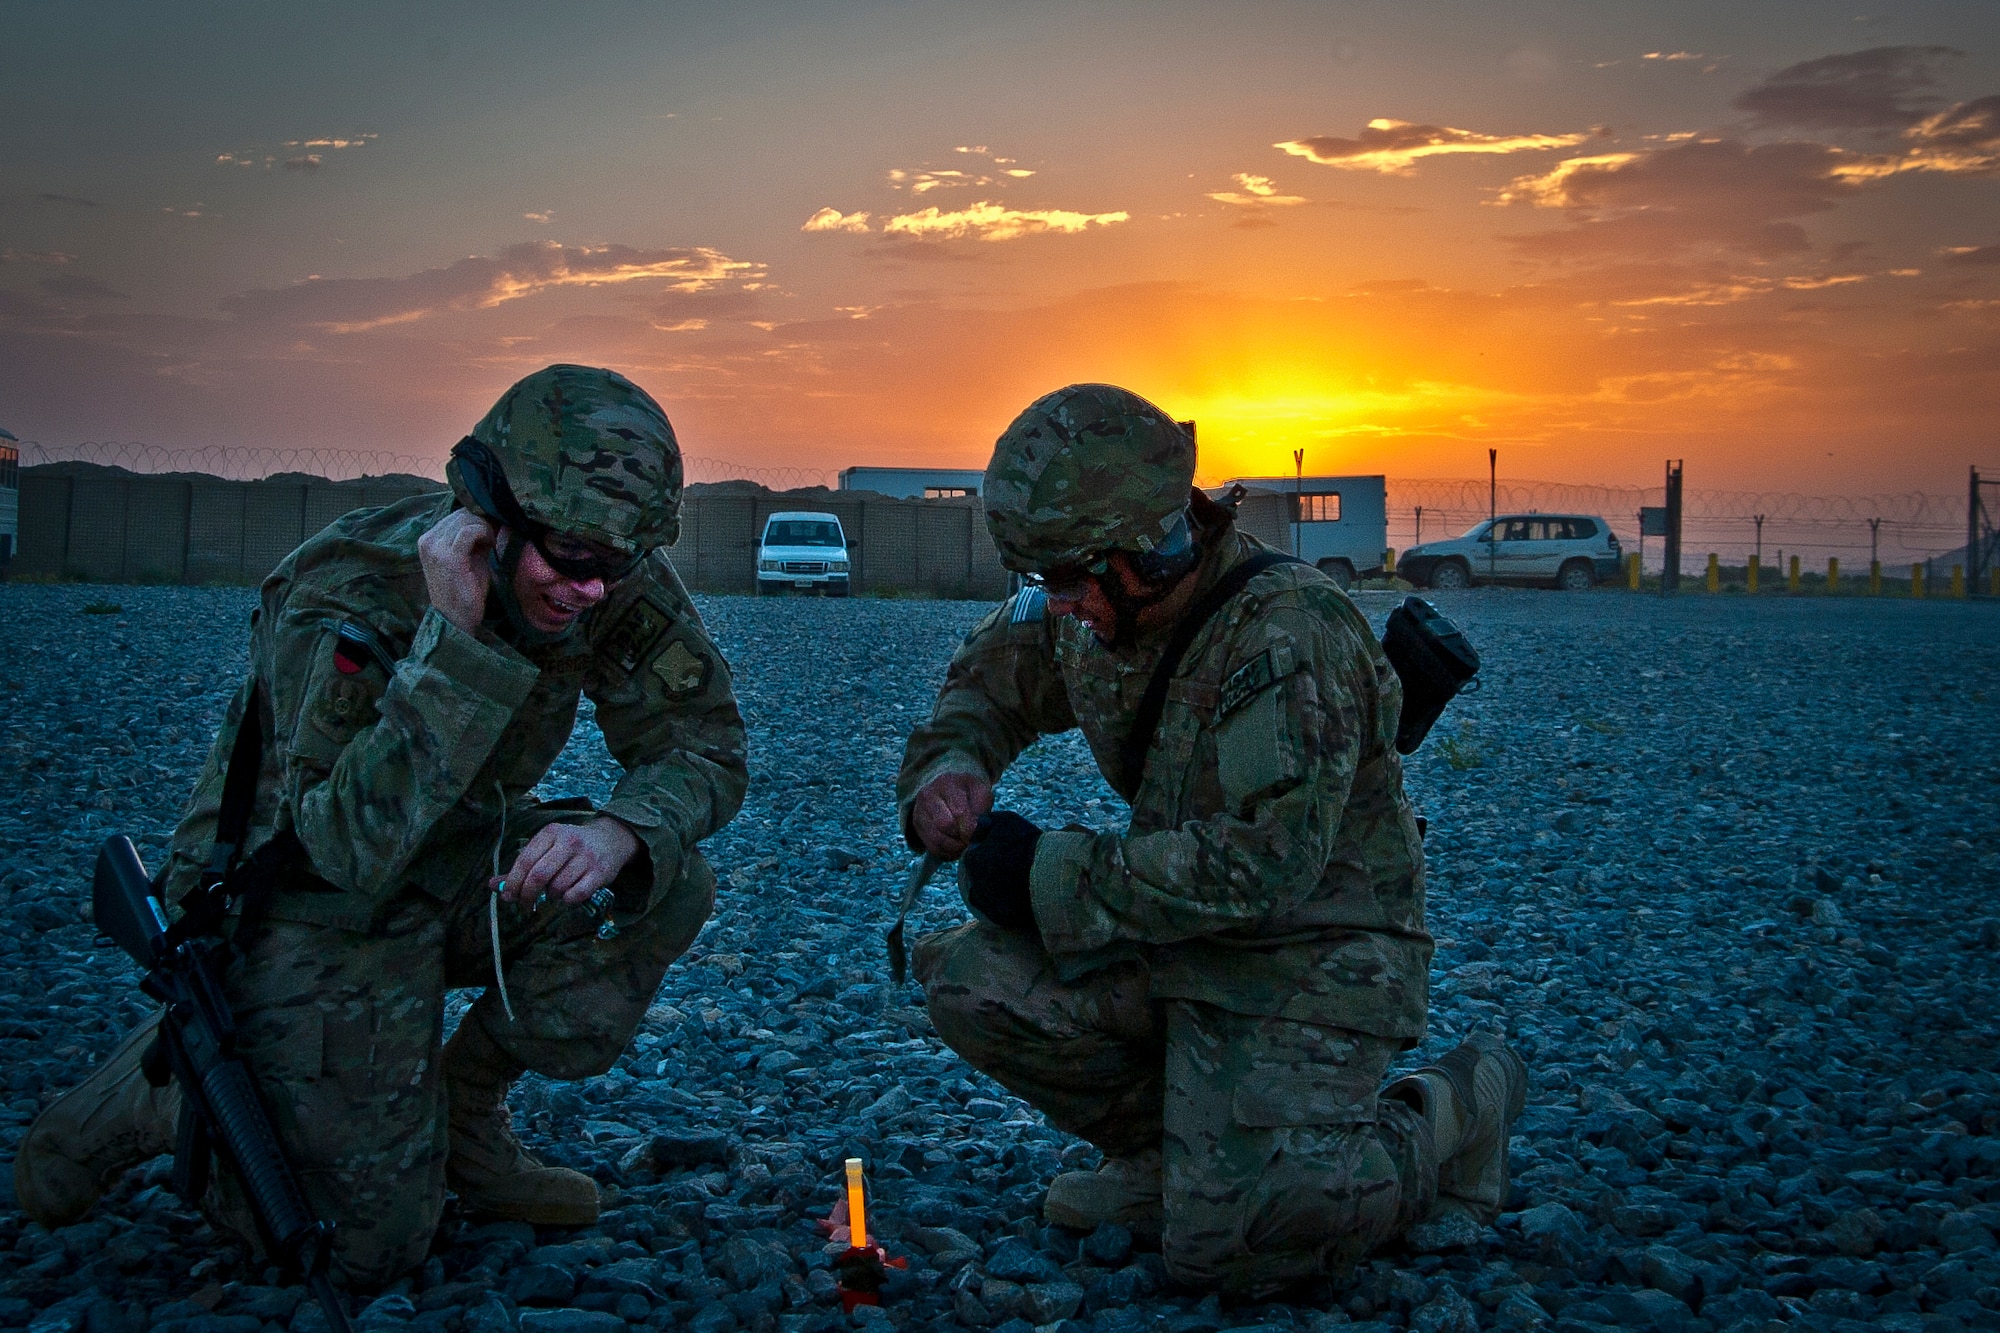 U.S. Air Force Senior Airman David Hales and Tech. Sgt. Michael Docodcil, both with the 451st Expeditionary Logistics Readiness Squadron, emplace chemical lights to illuminate a helicopter landing zone for a UH-60 Black Hawk during a joint-coalition sling load training mission at Kandahar Airfield, Afghanistan, June 1, 2013. The training provided coalition members the opportunity to learn the concepts of illuminating a landing zone as well as in-flight cargo sling loading. (U.S. Air Force photo/Senior Airman Scott Saldukas)